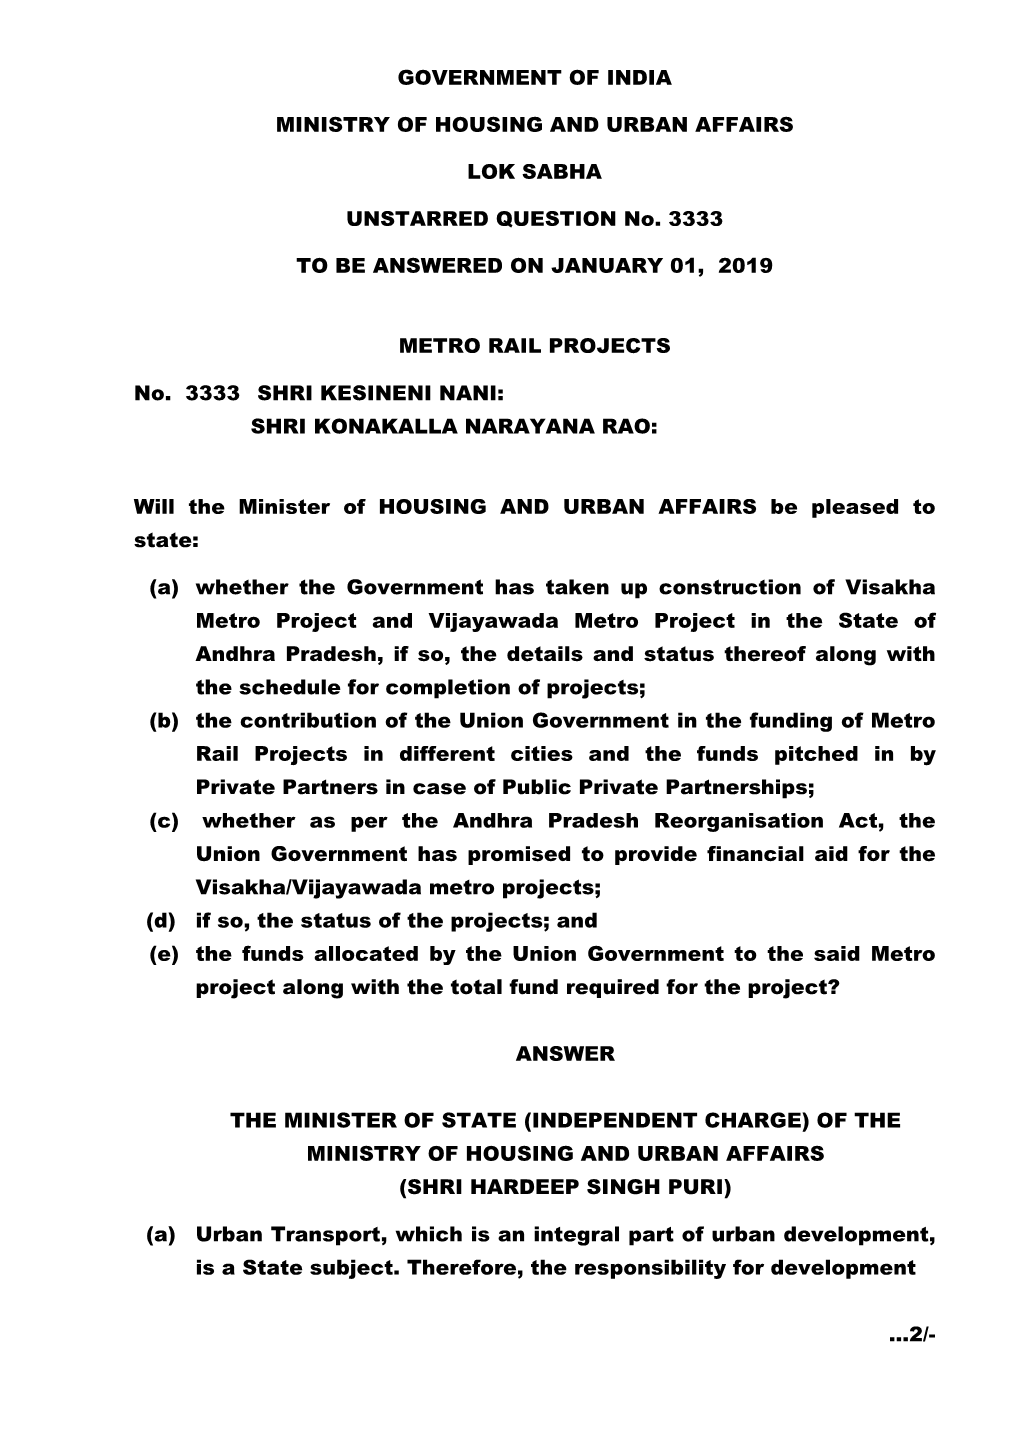 GOVERNMENT of INDIA MINISTRY of HOUSING and URBAN AFFAIRS LOK SABHA UNSTARRED QUESTION No. 3333 to BE ANSWERED on JANUARY 01, 2